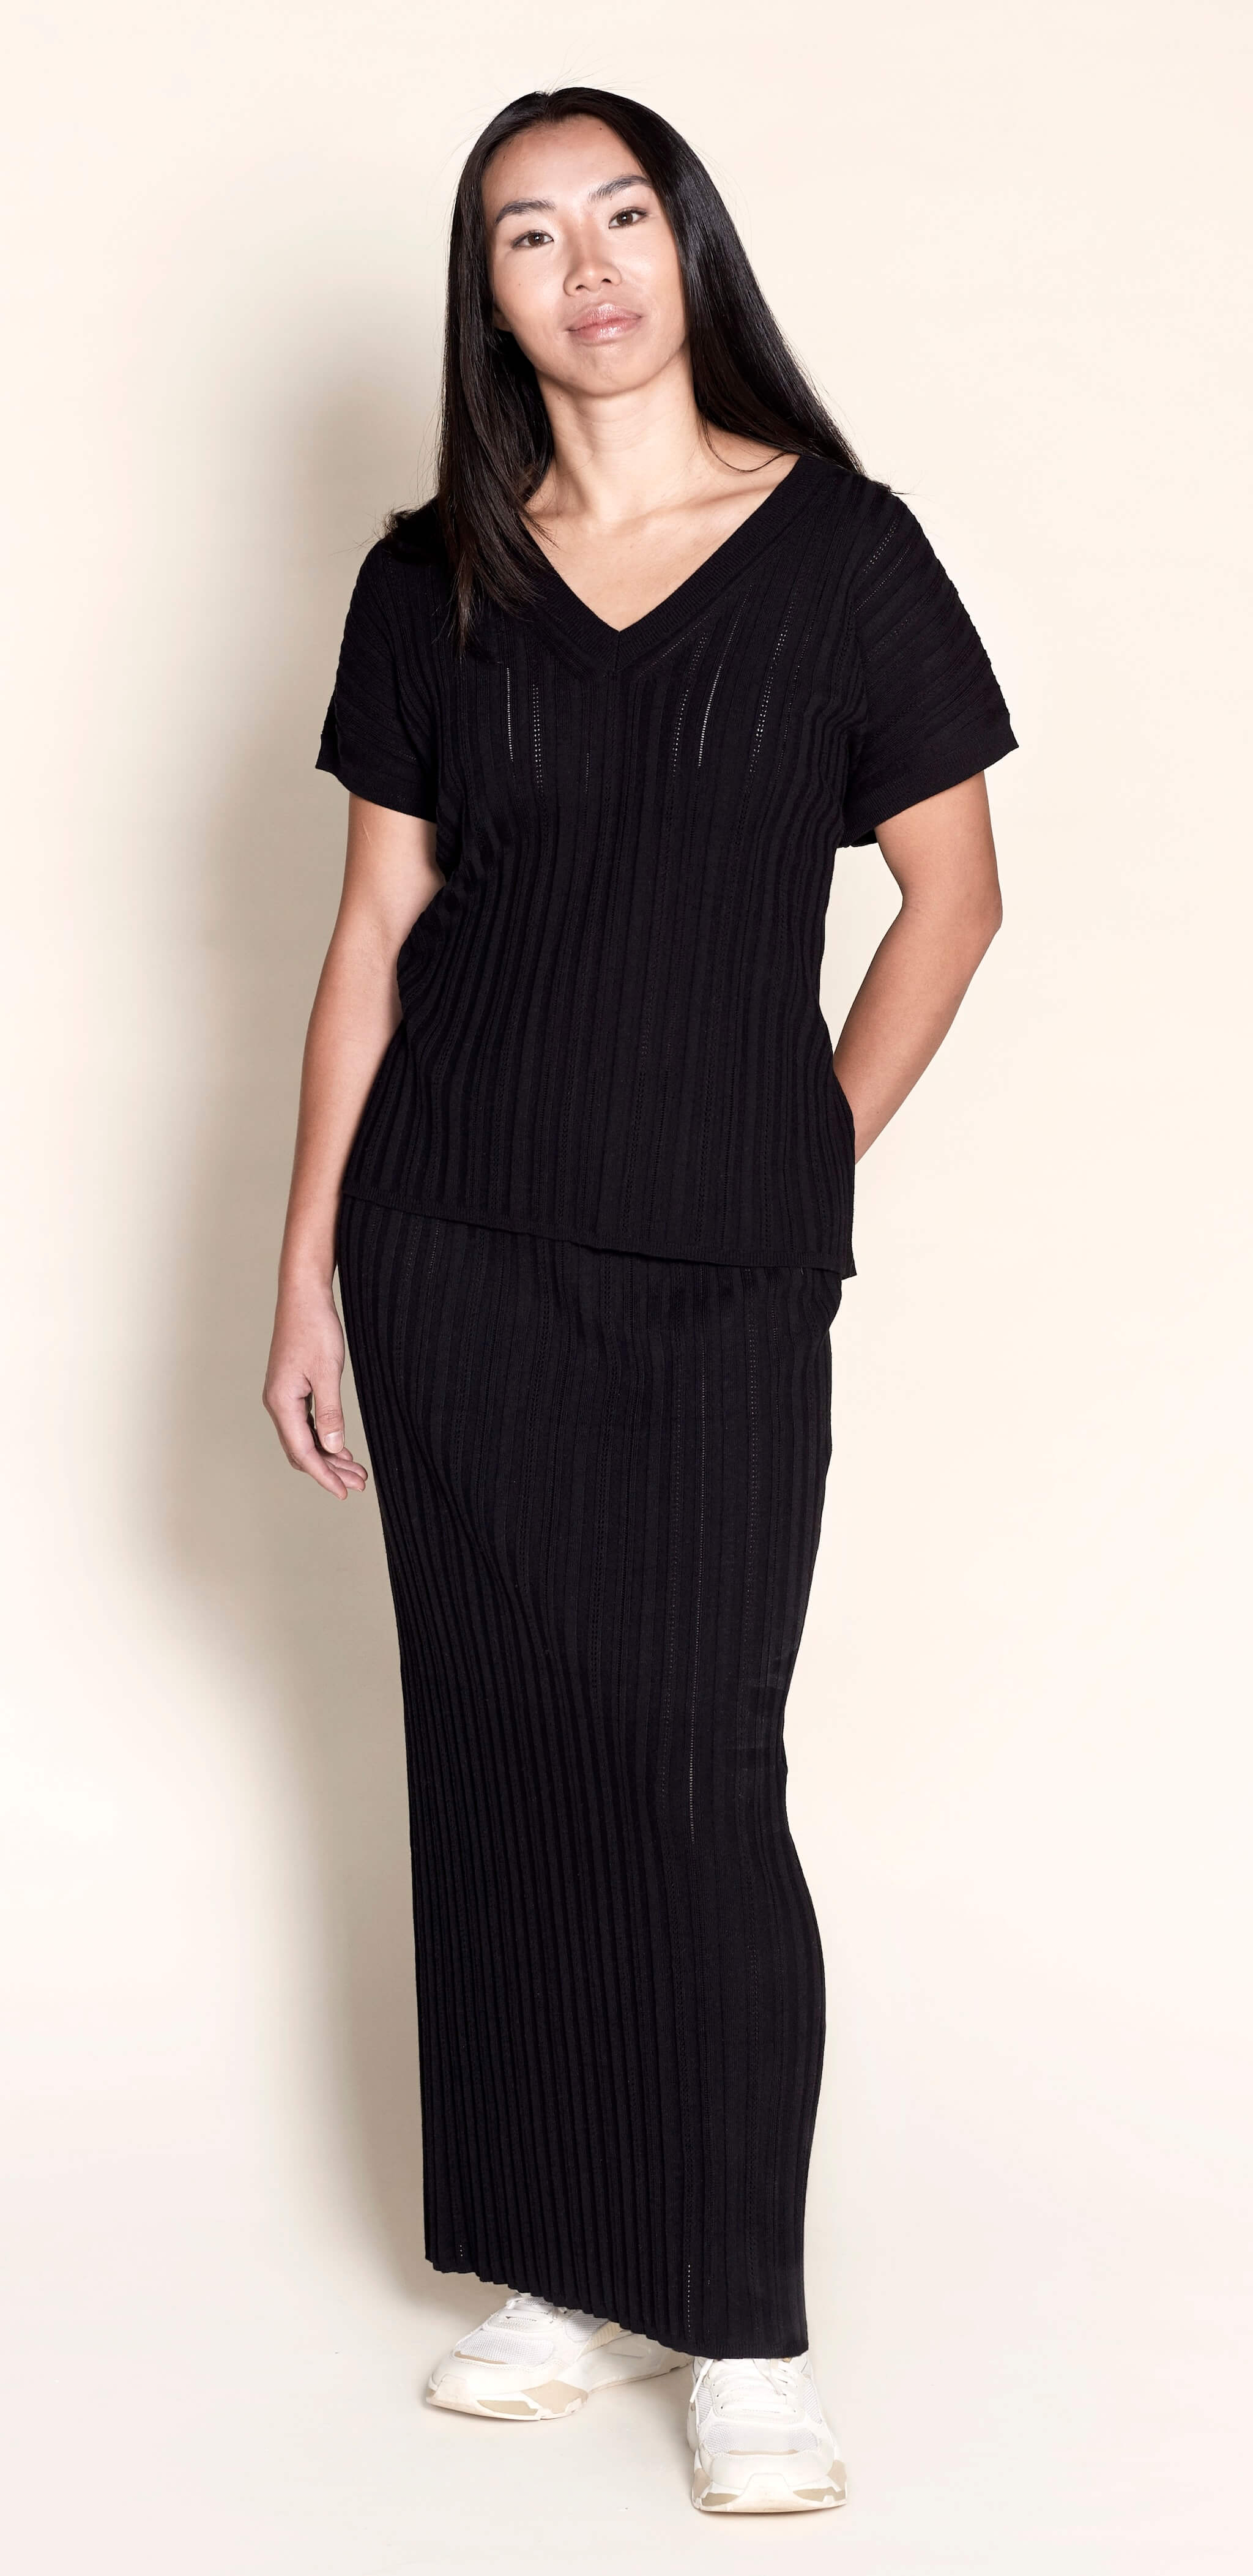 Model elegantly dons a Cyme Copenhagen all-black ribbed knit ensemble, featuring a V-neck top and matching skirt, a chic example of the brand's sustainable fashion offerings in women's clothing from a top Danish designer.